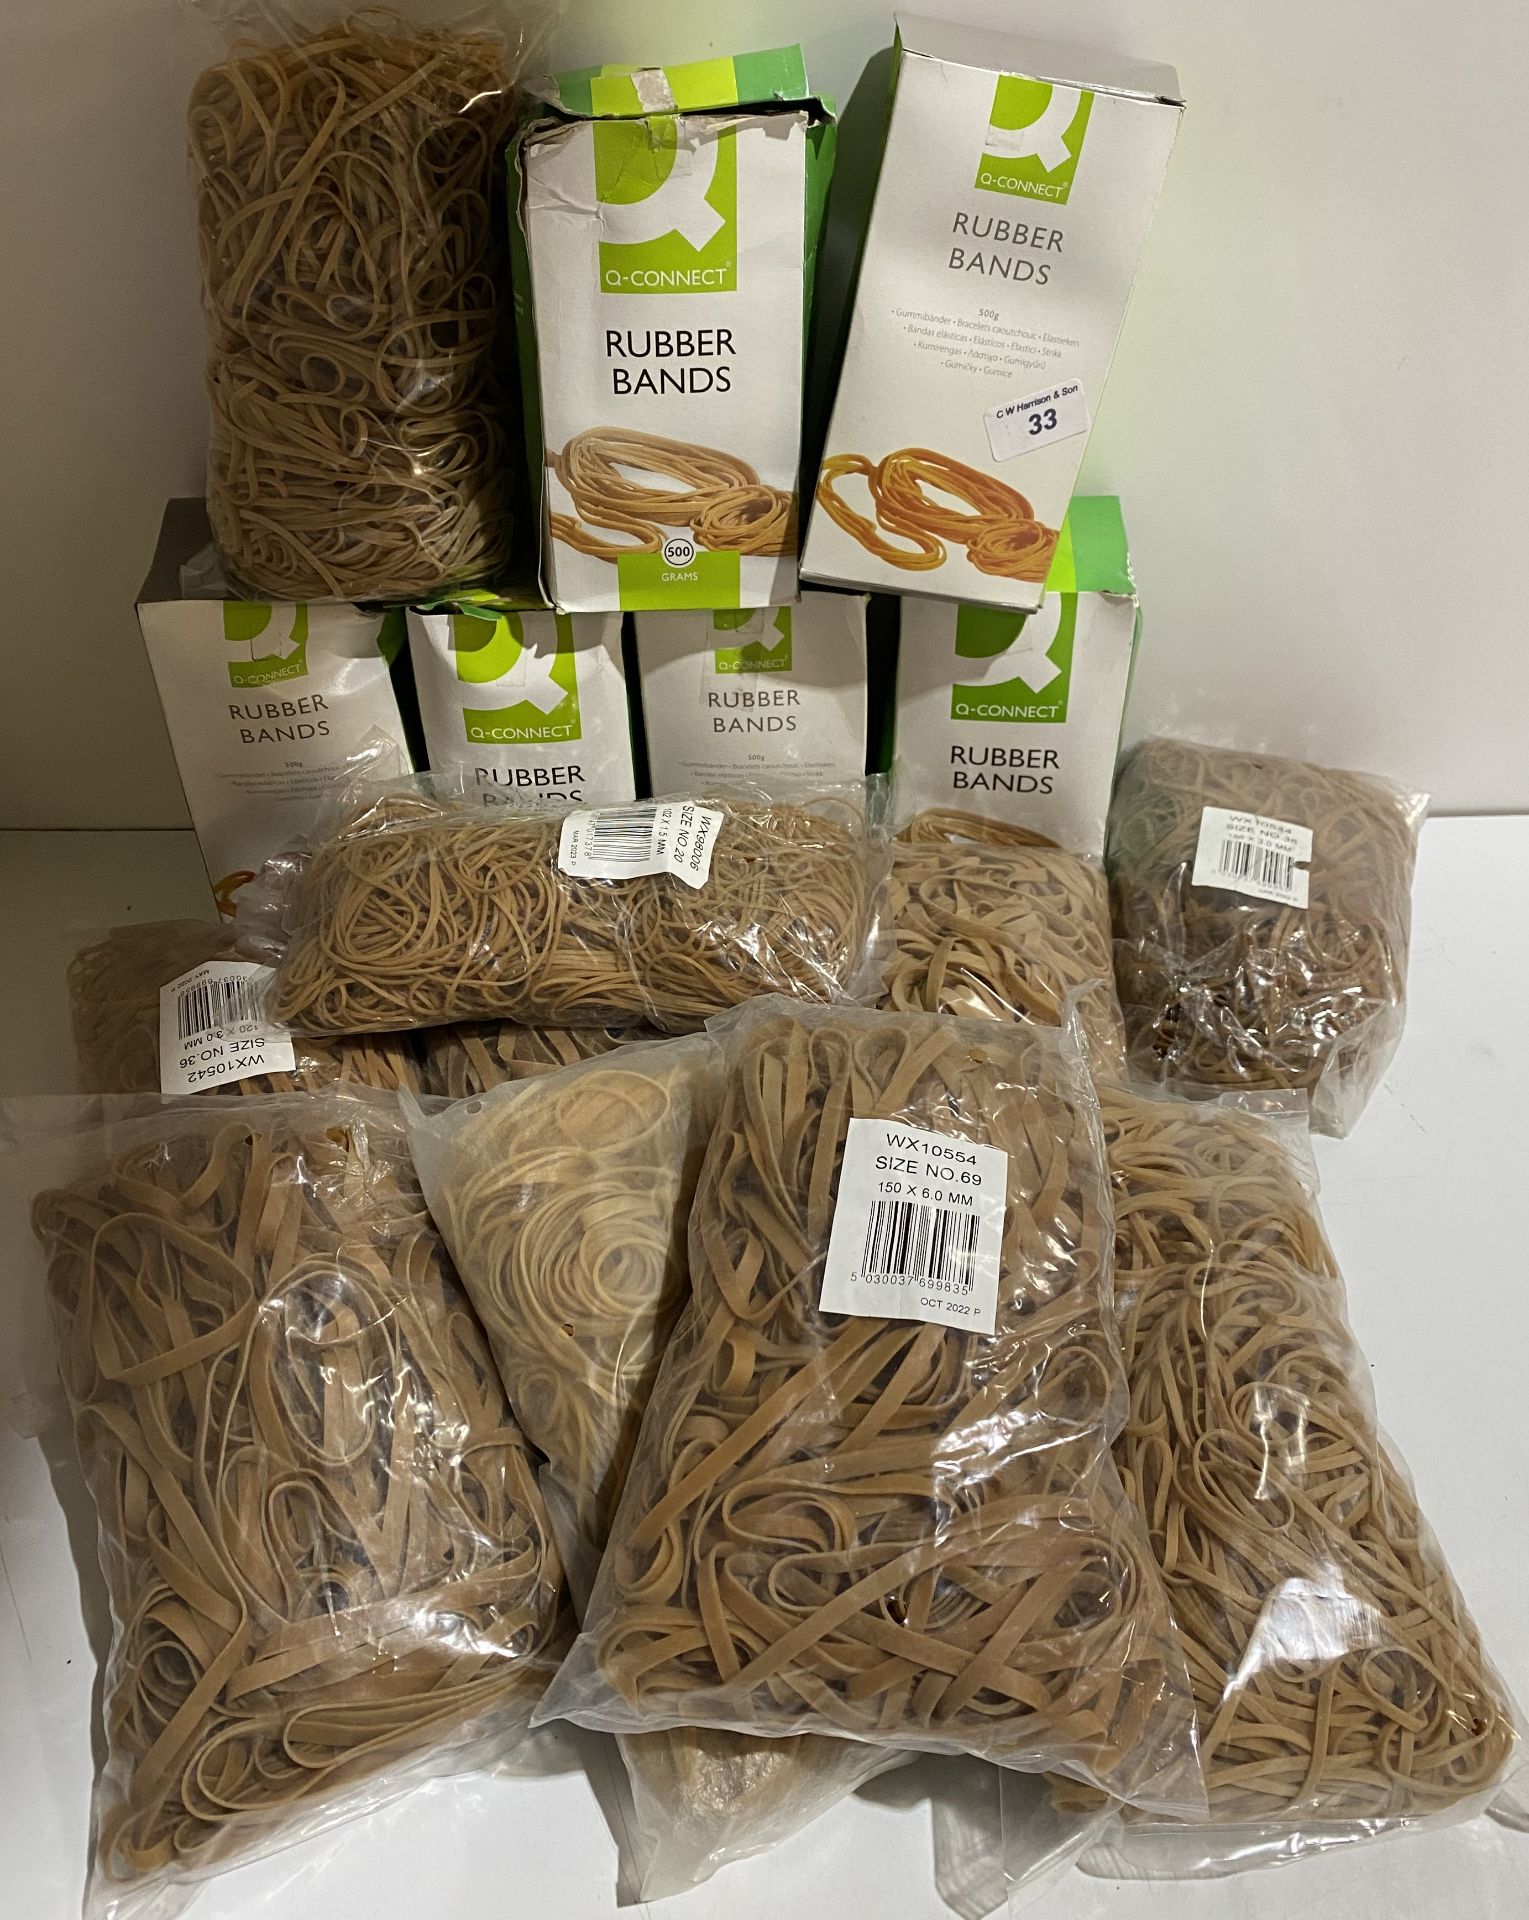 16 bags/boxes 500g each bag assorted sizes rubber bands